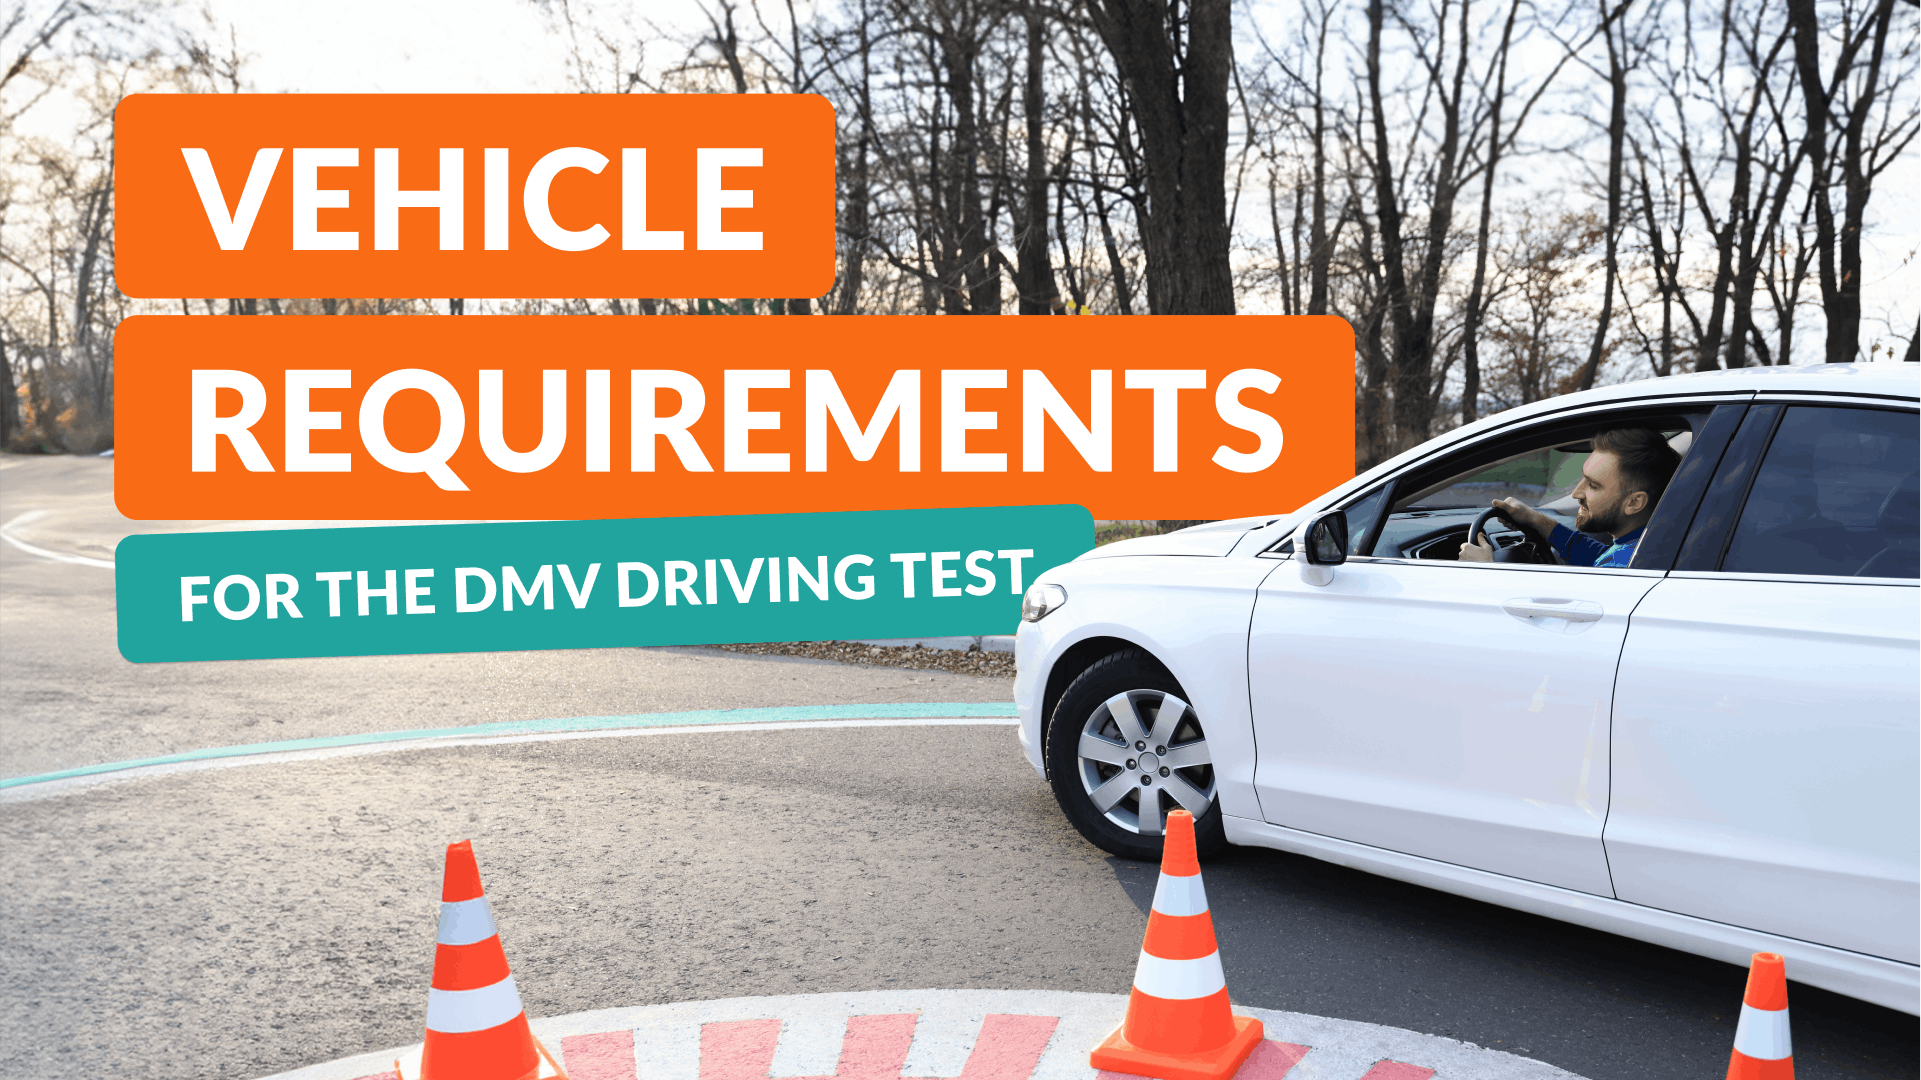 Vehicle Requirements for the DMV Driving Test: How to Make Sure Your Car is Ready